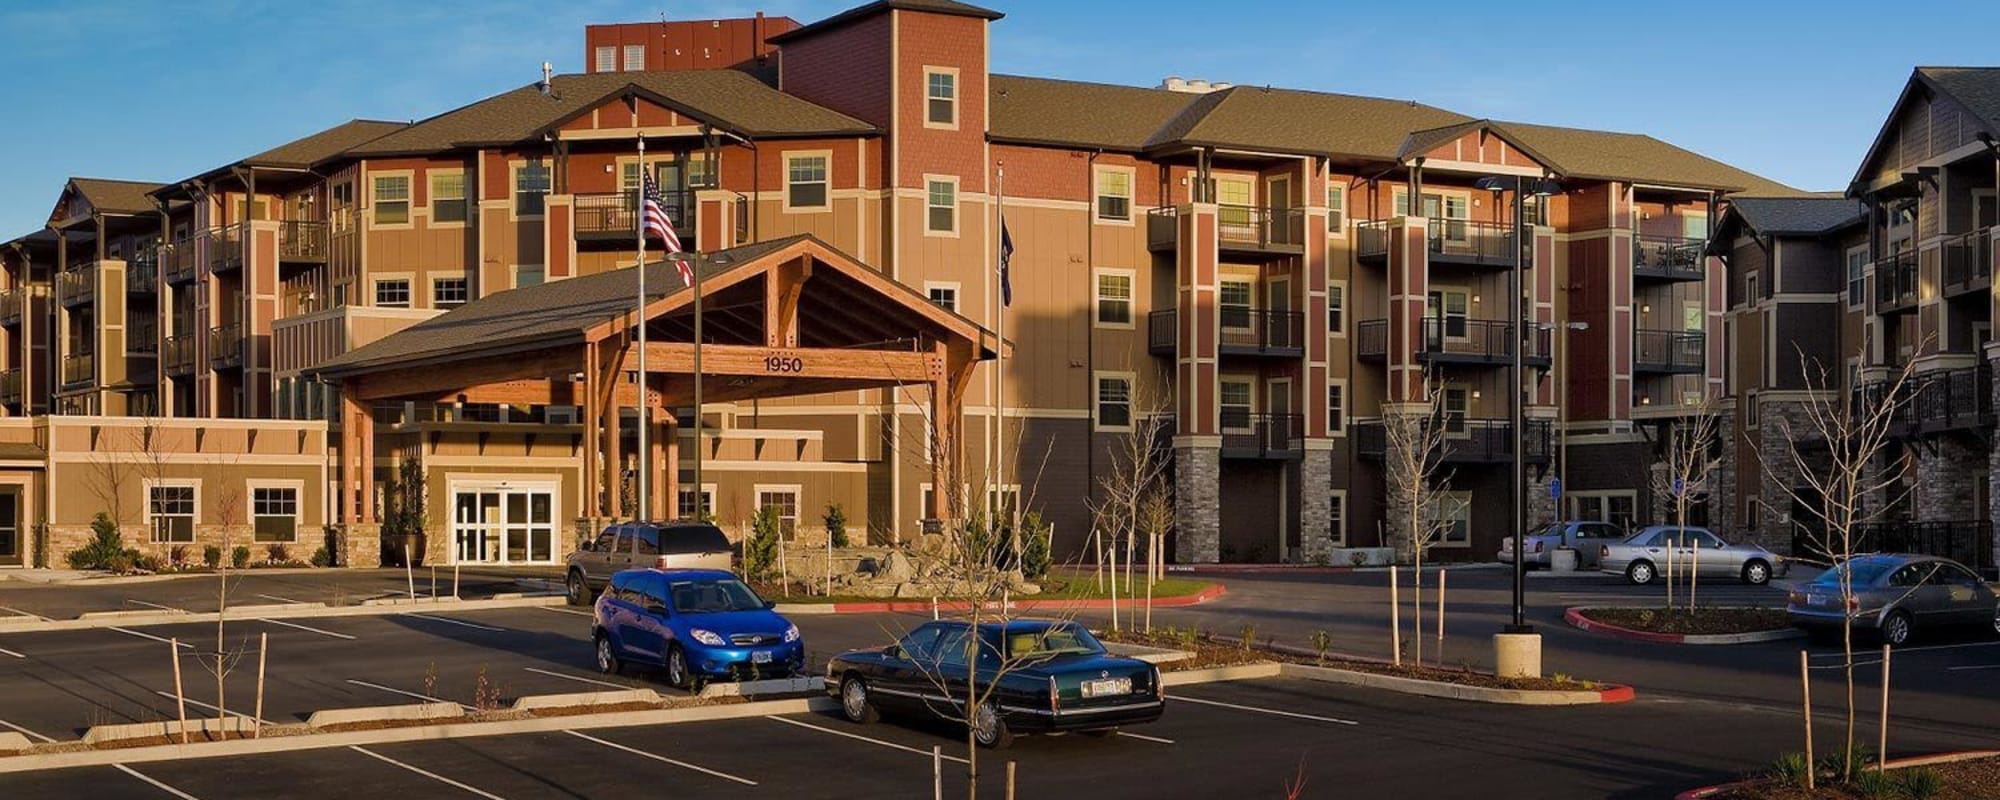 View of the facilities at The Springs at Tanasbourne in Hillsboro, Oregon